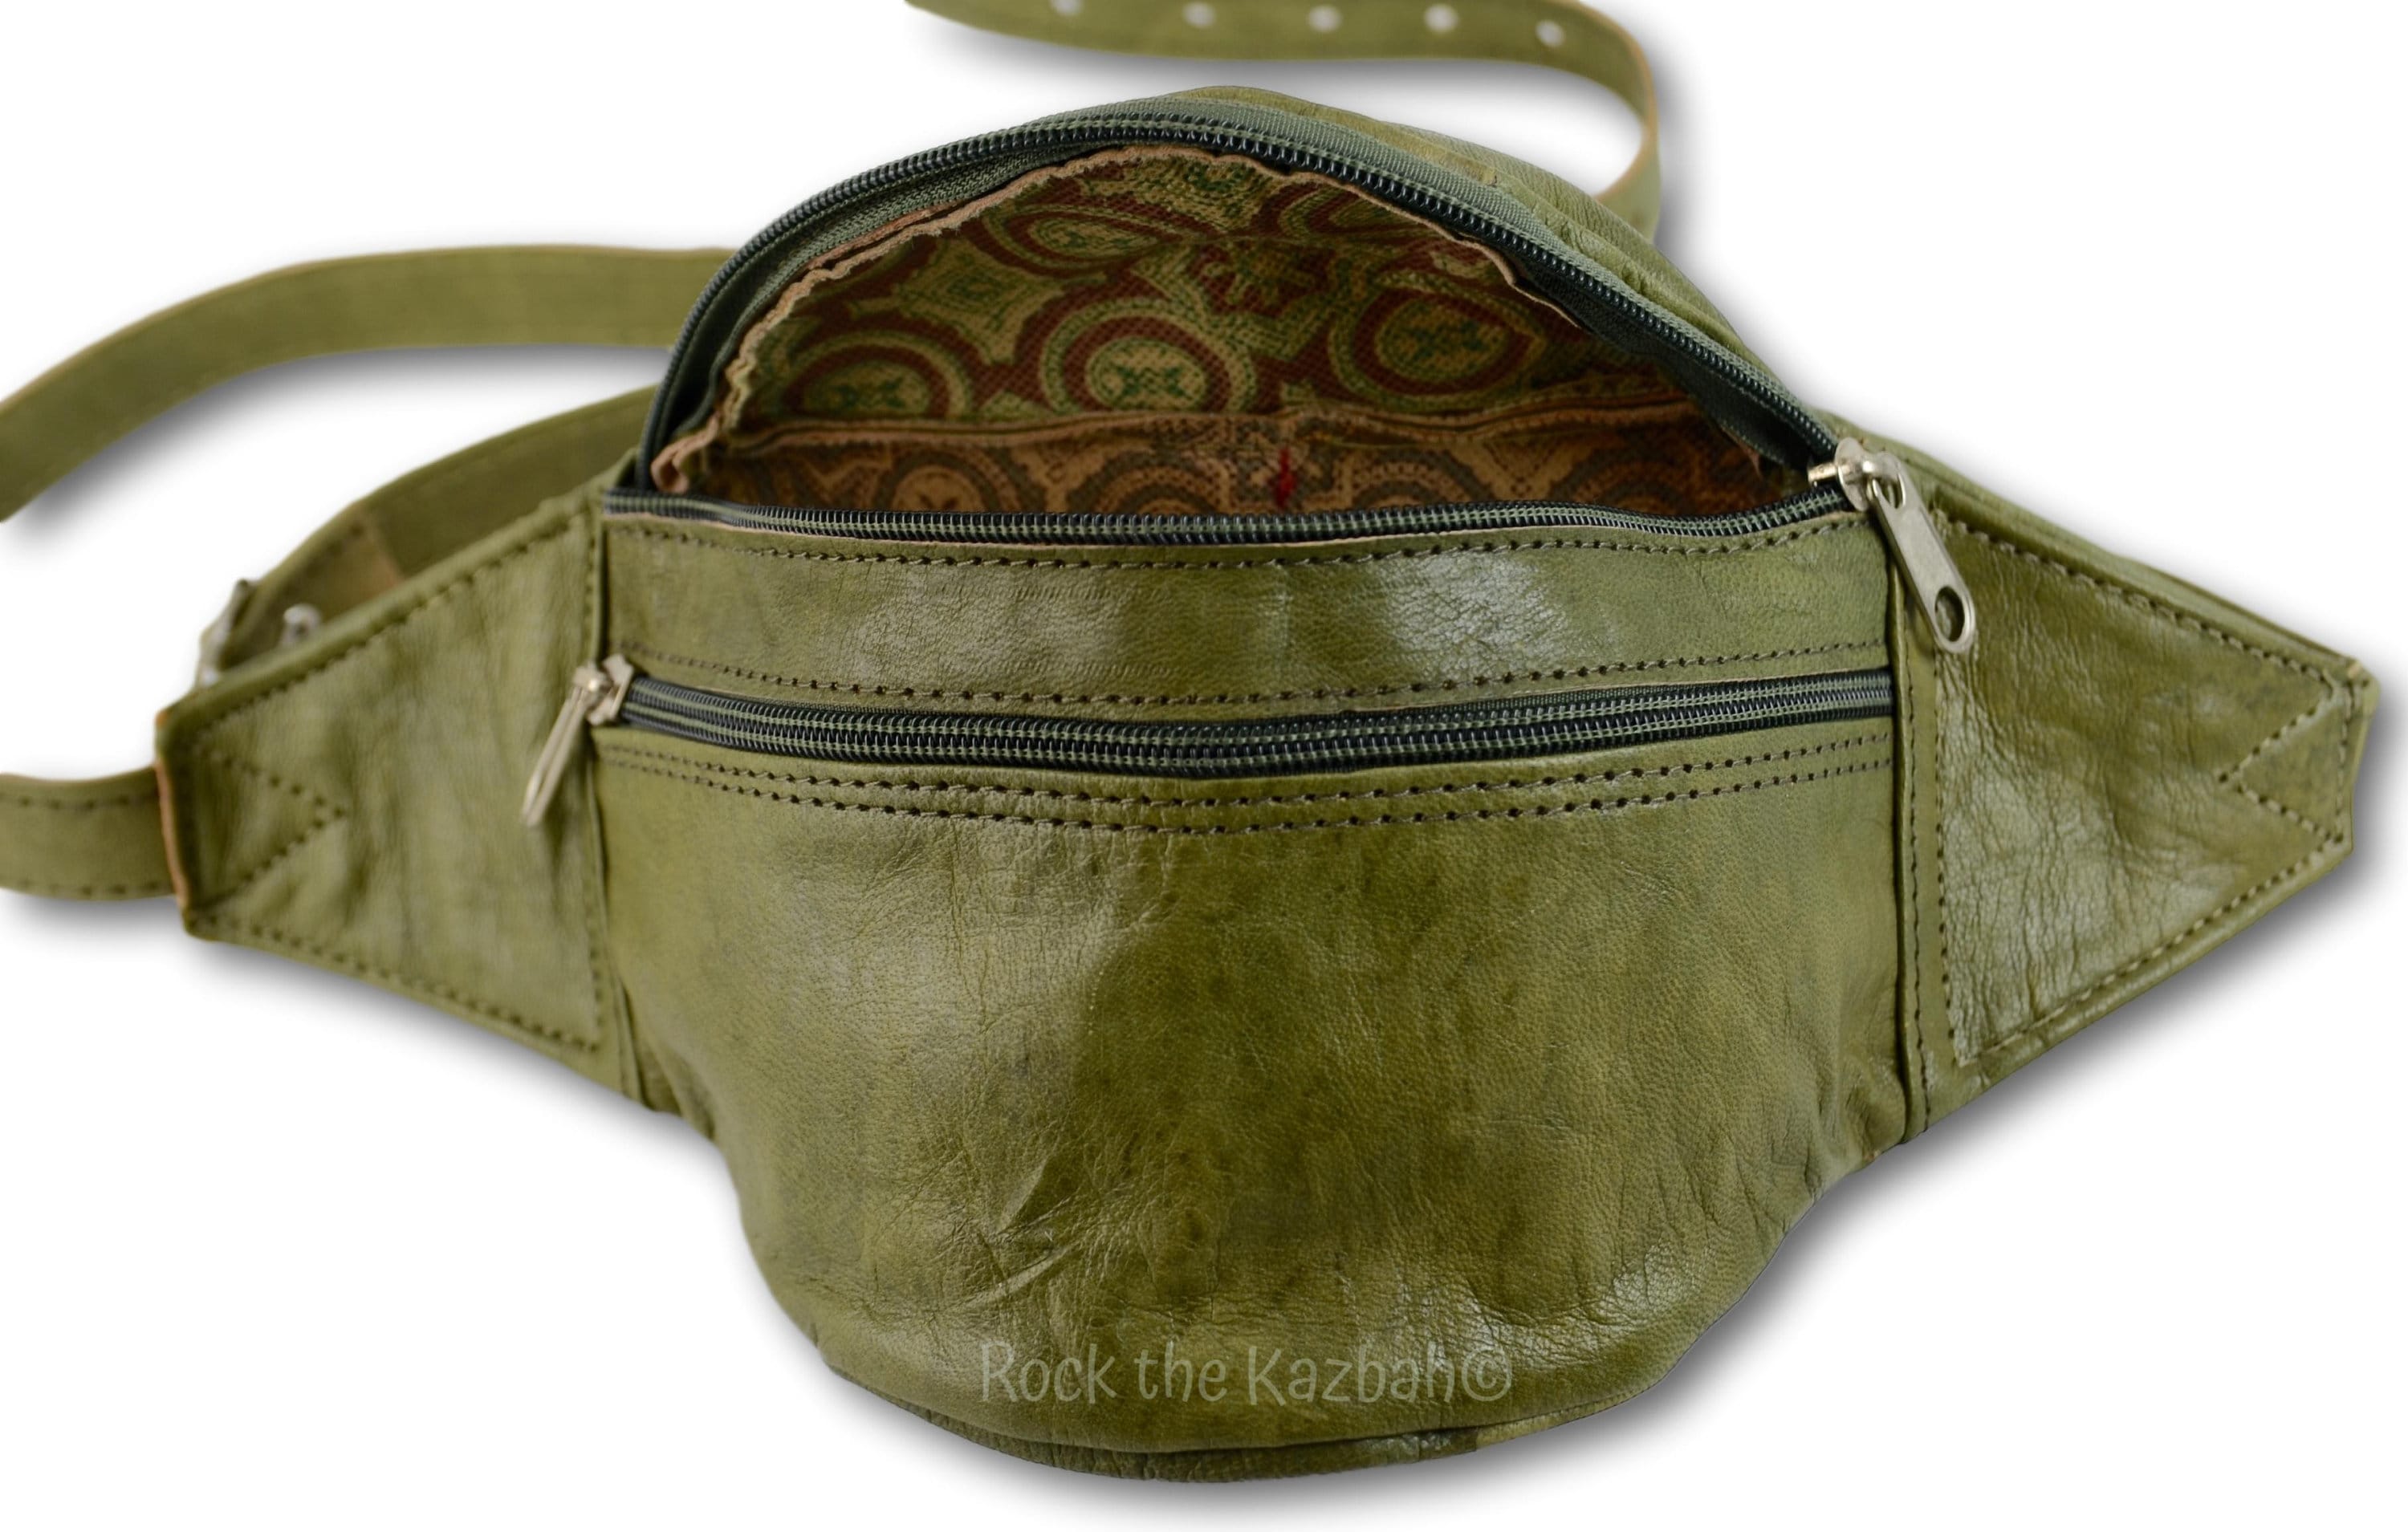 Handmade Classy Belt Bag with Moroccan Weaving-Sultan — The Nopo